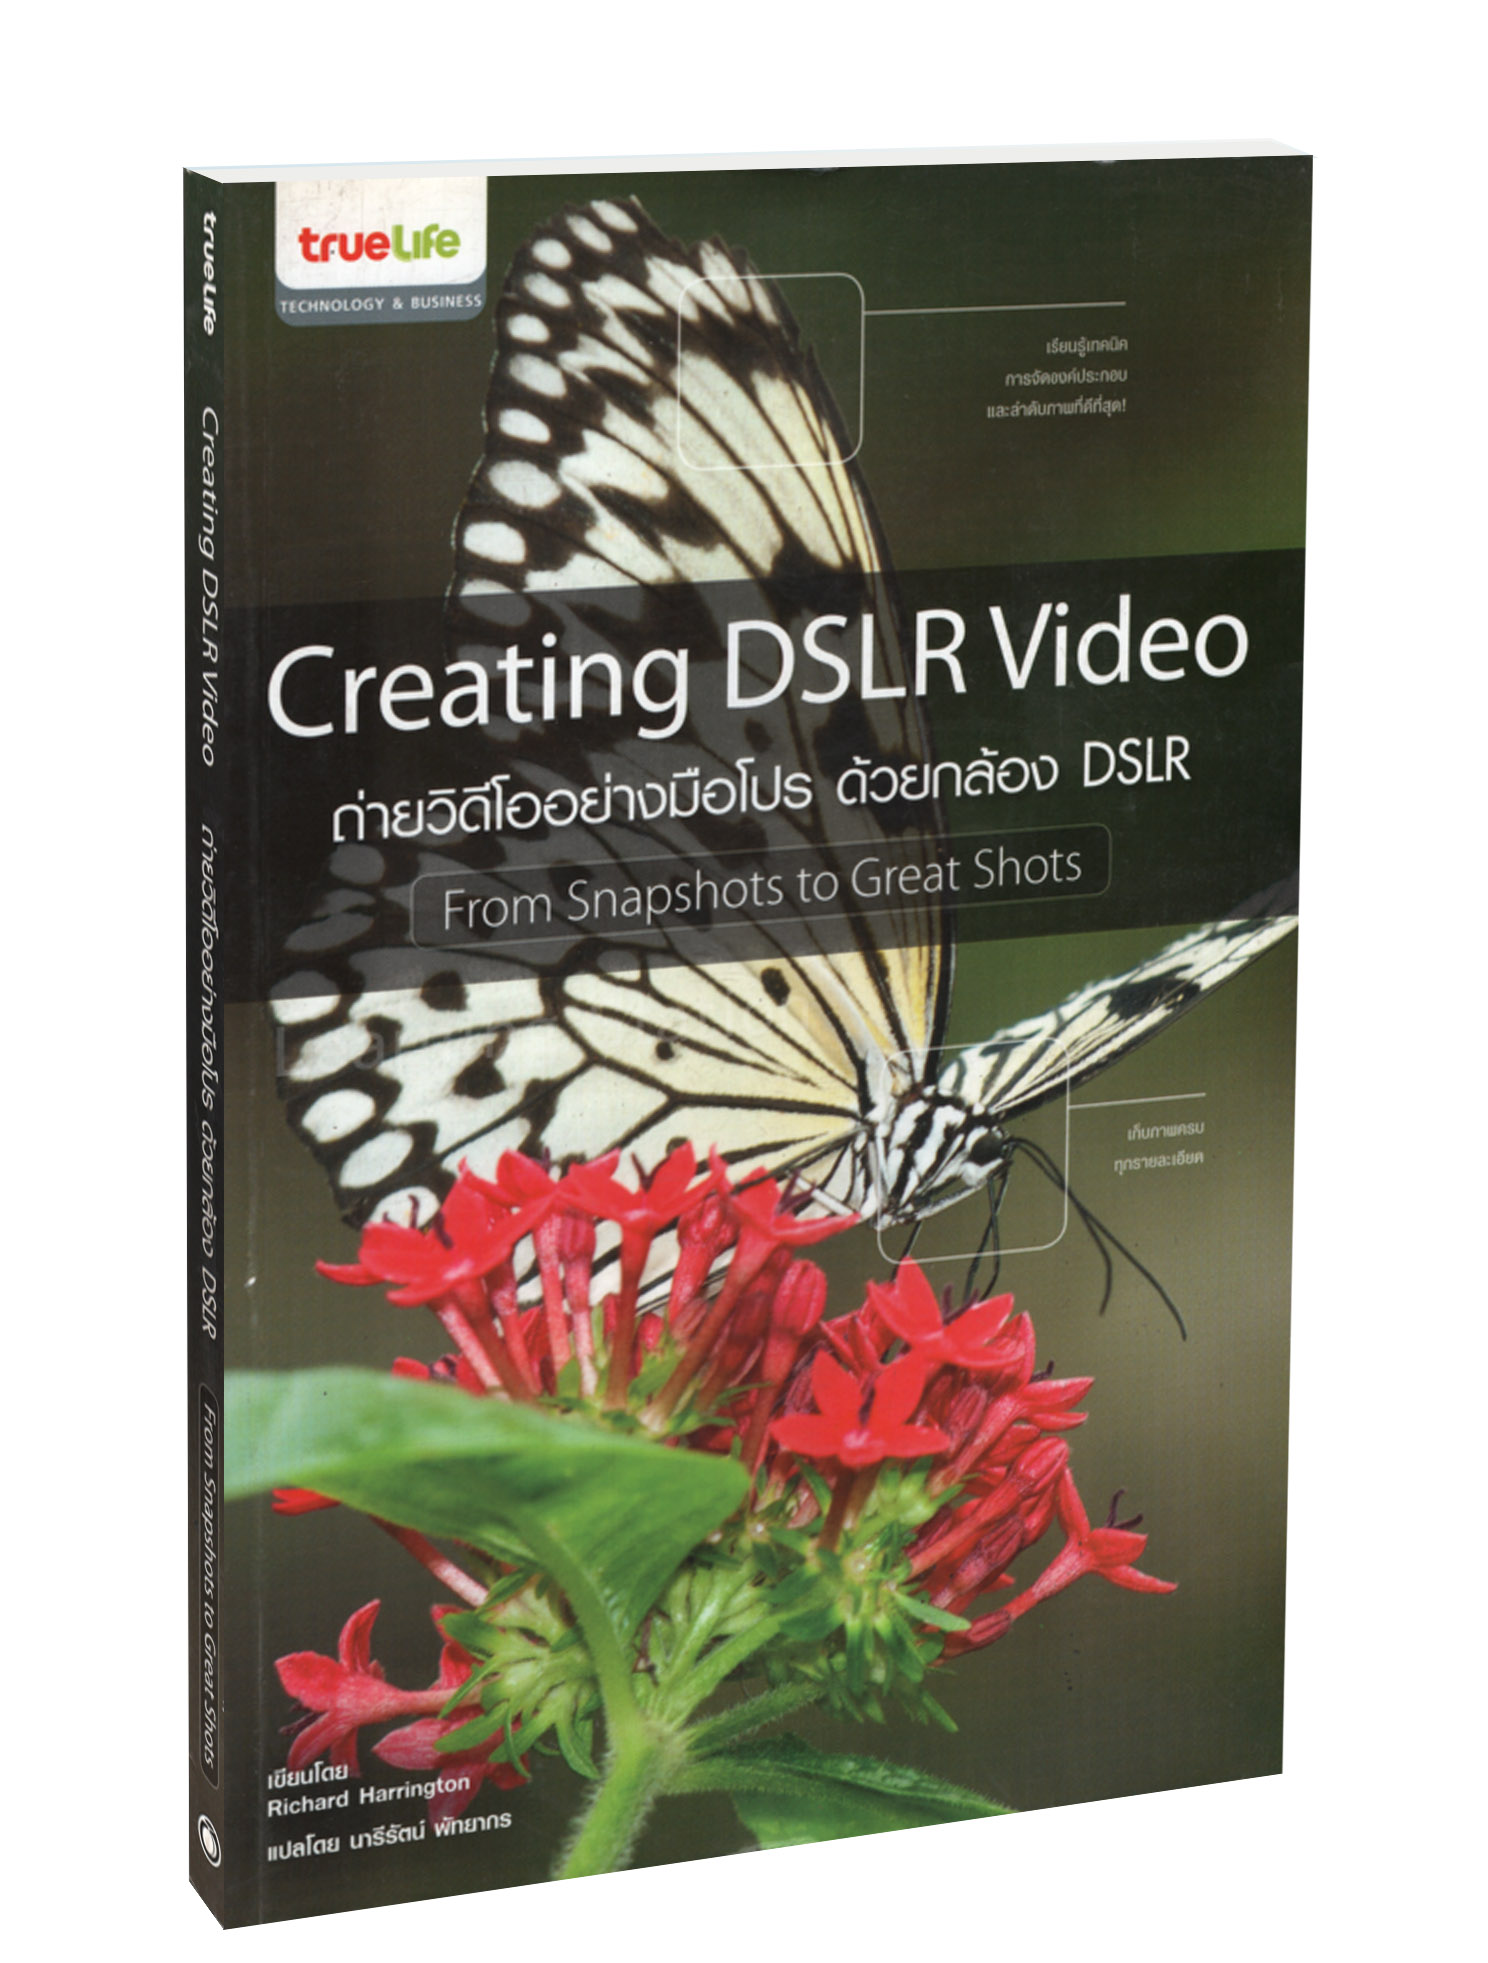 Creating DSLR Video from Snapshots to Great Shots